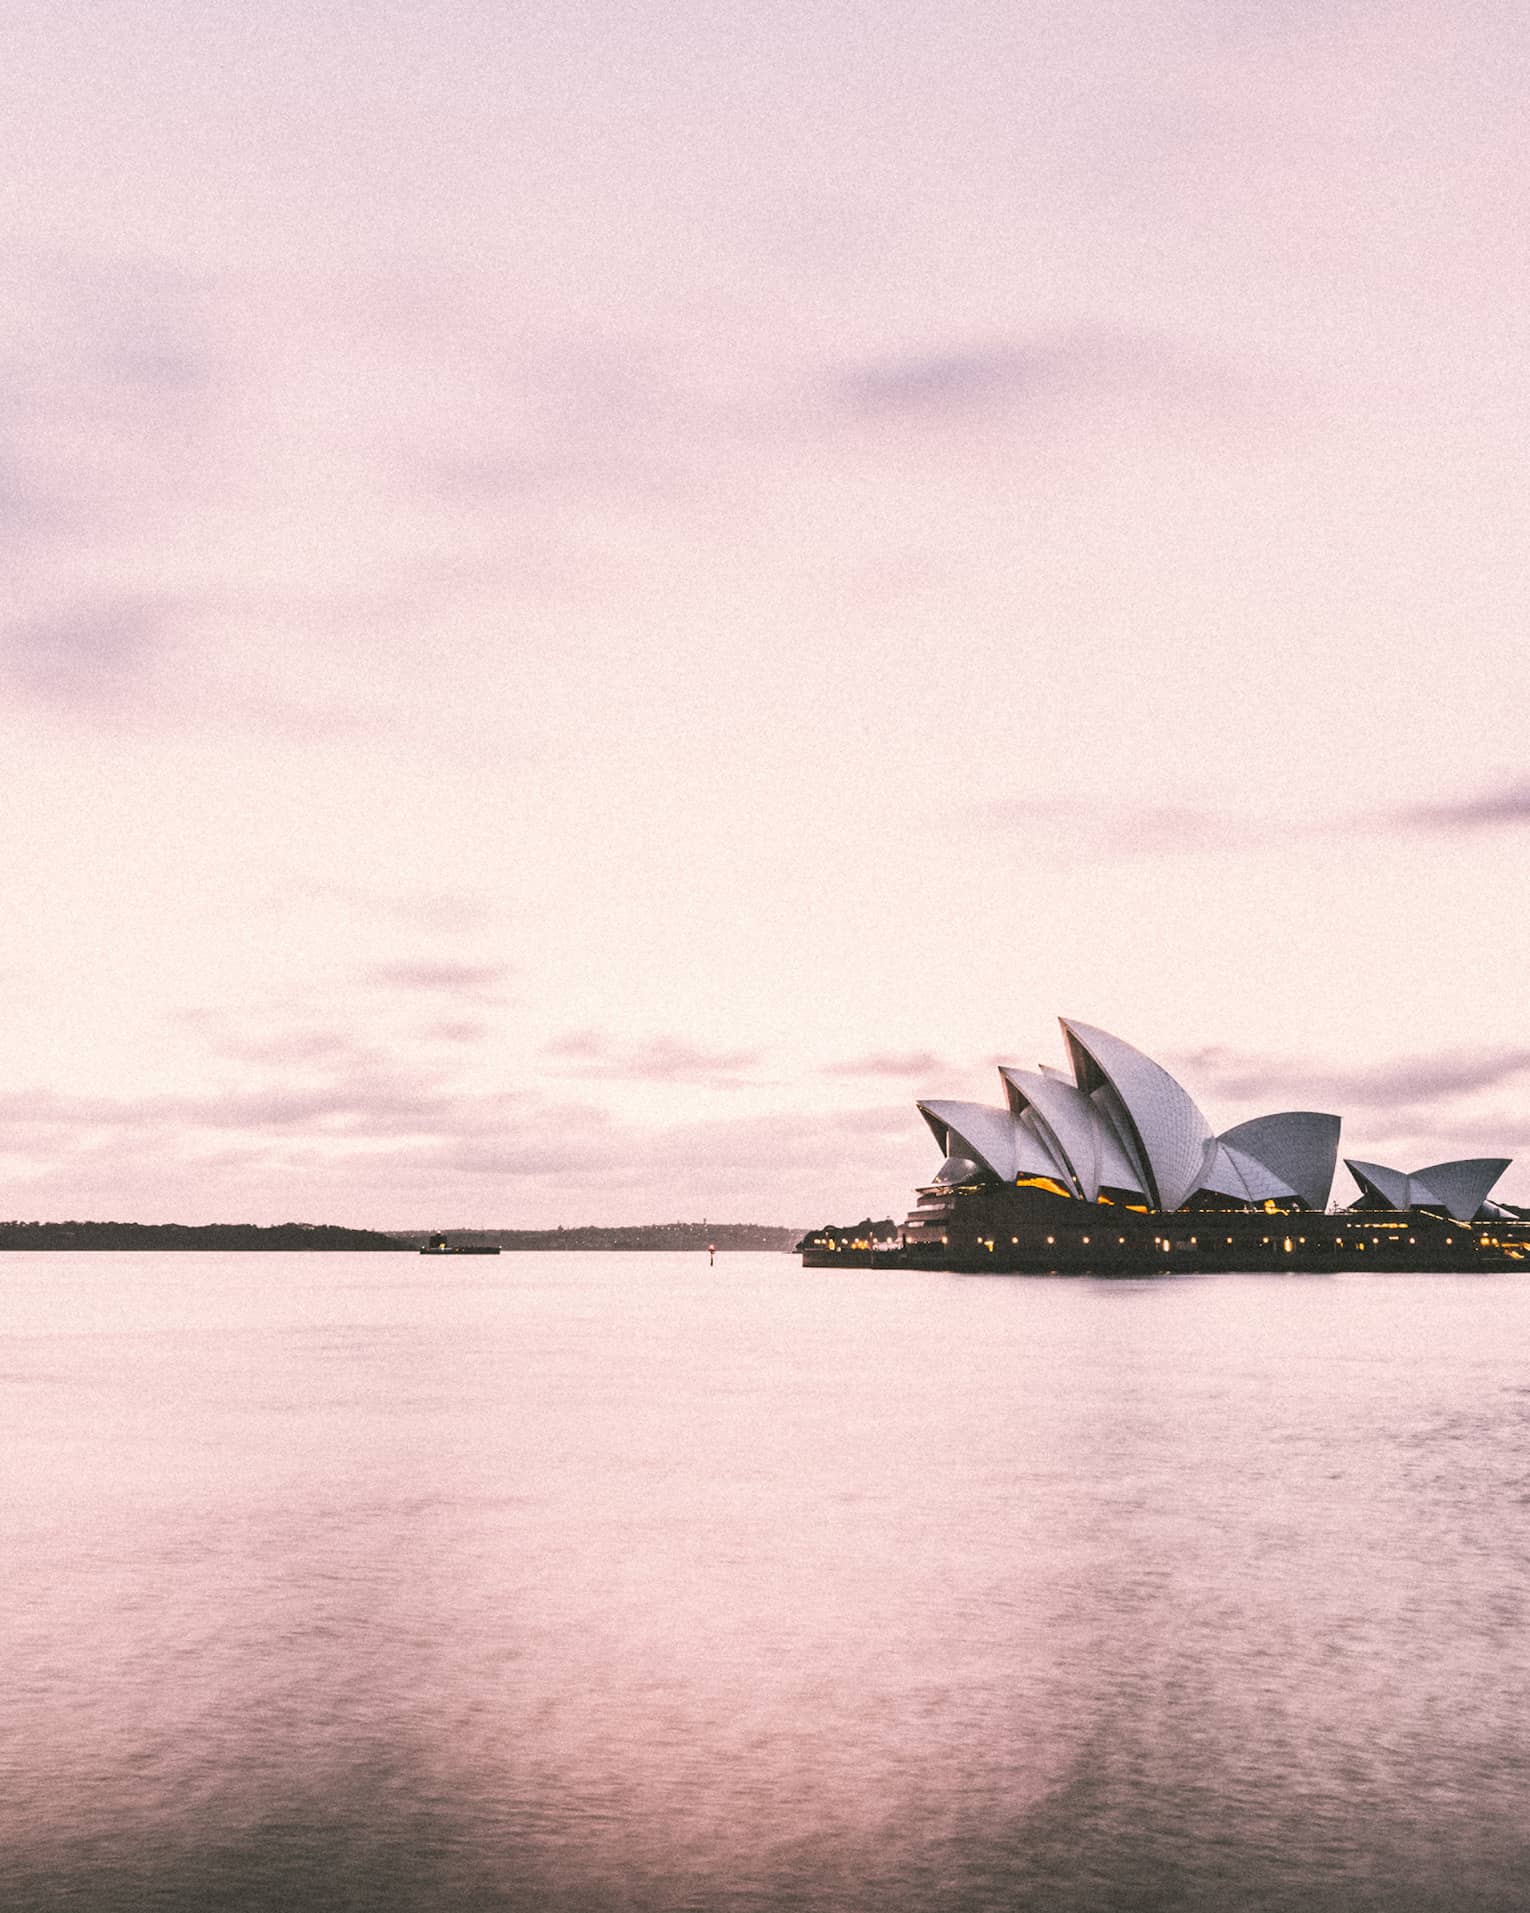 Sydney Harbour's iconic Opera House building on water, pink hue